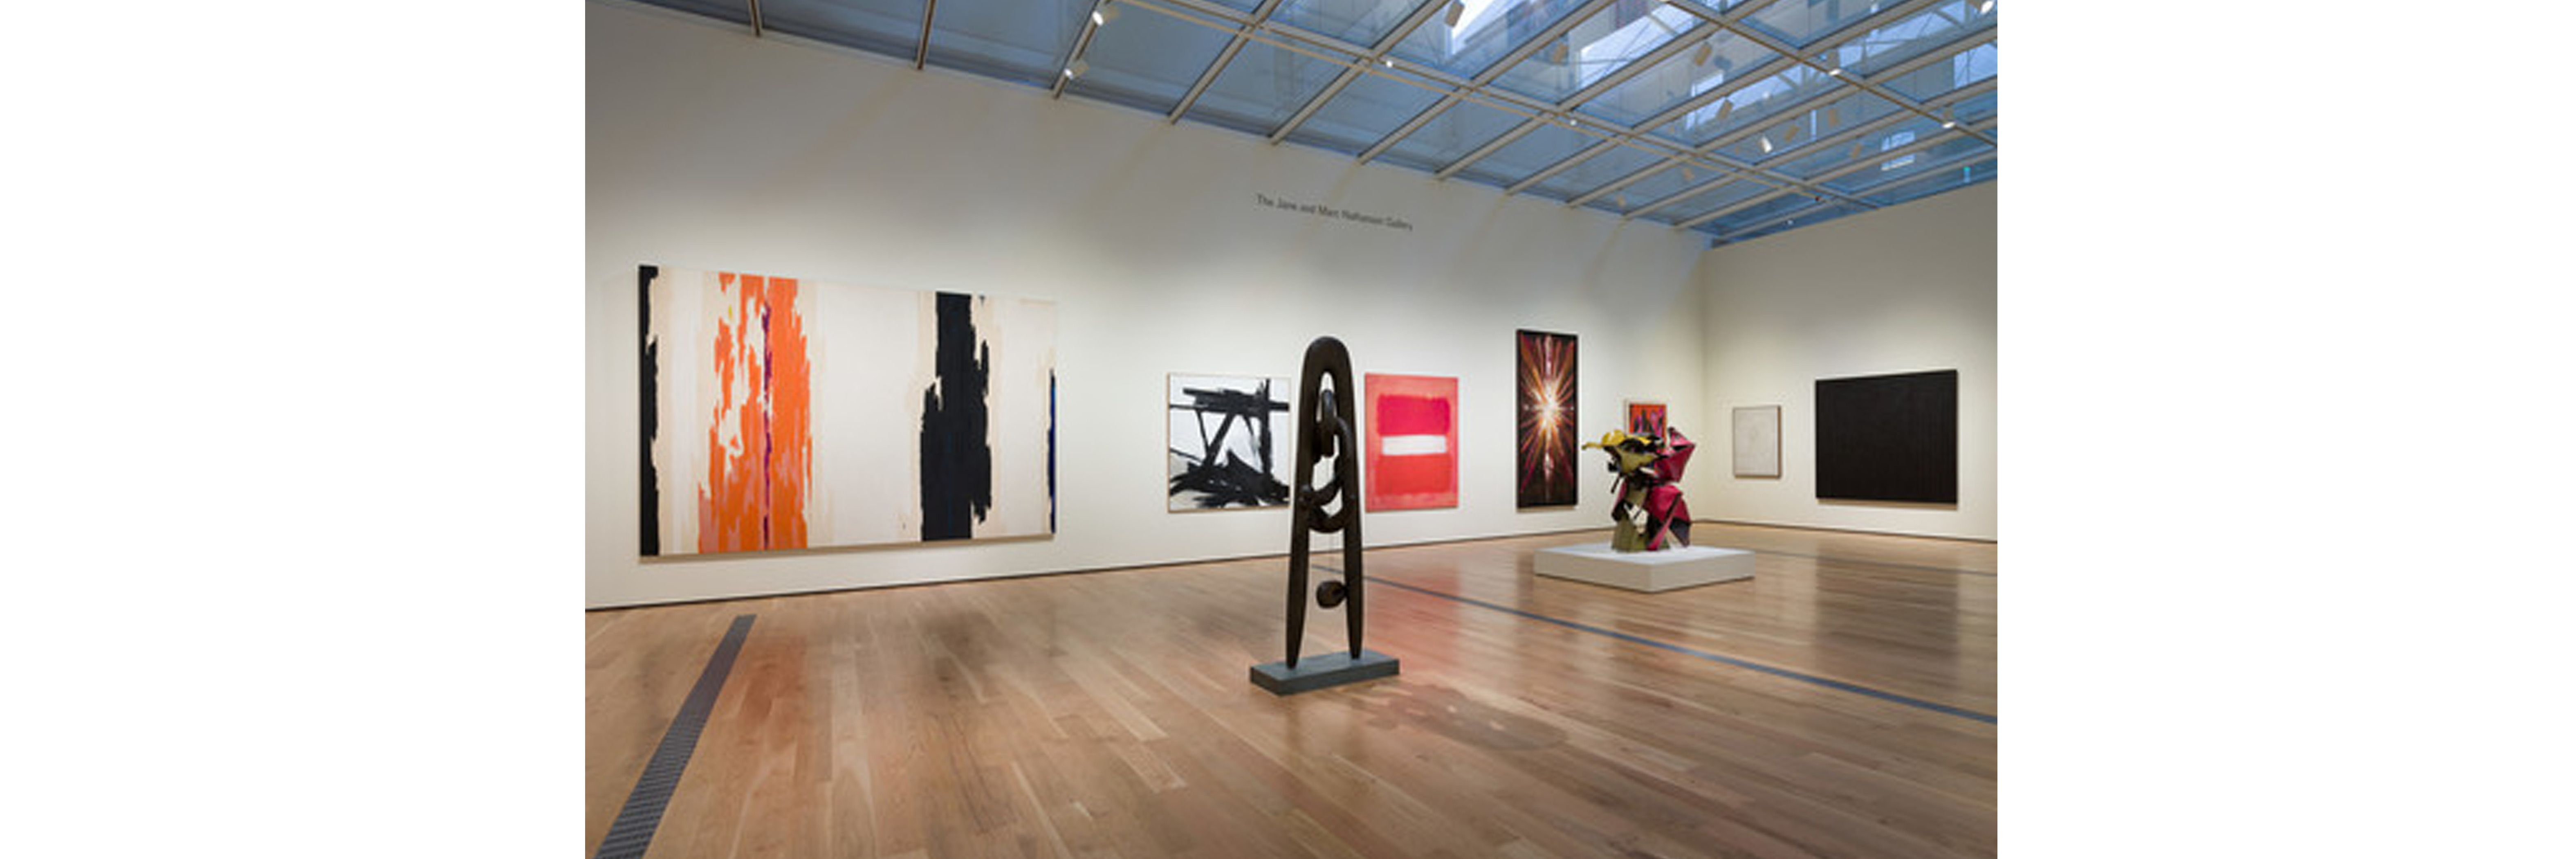 Installation view of the new Modern Art presentation on BCAM, Level 3, Los Angeles County Museum of Art, June 13, 2021–ongoing, photo © Fredrik Nilsen